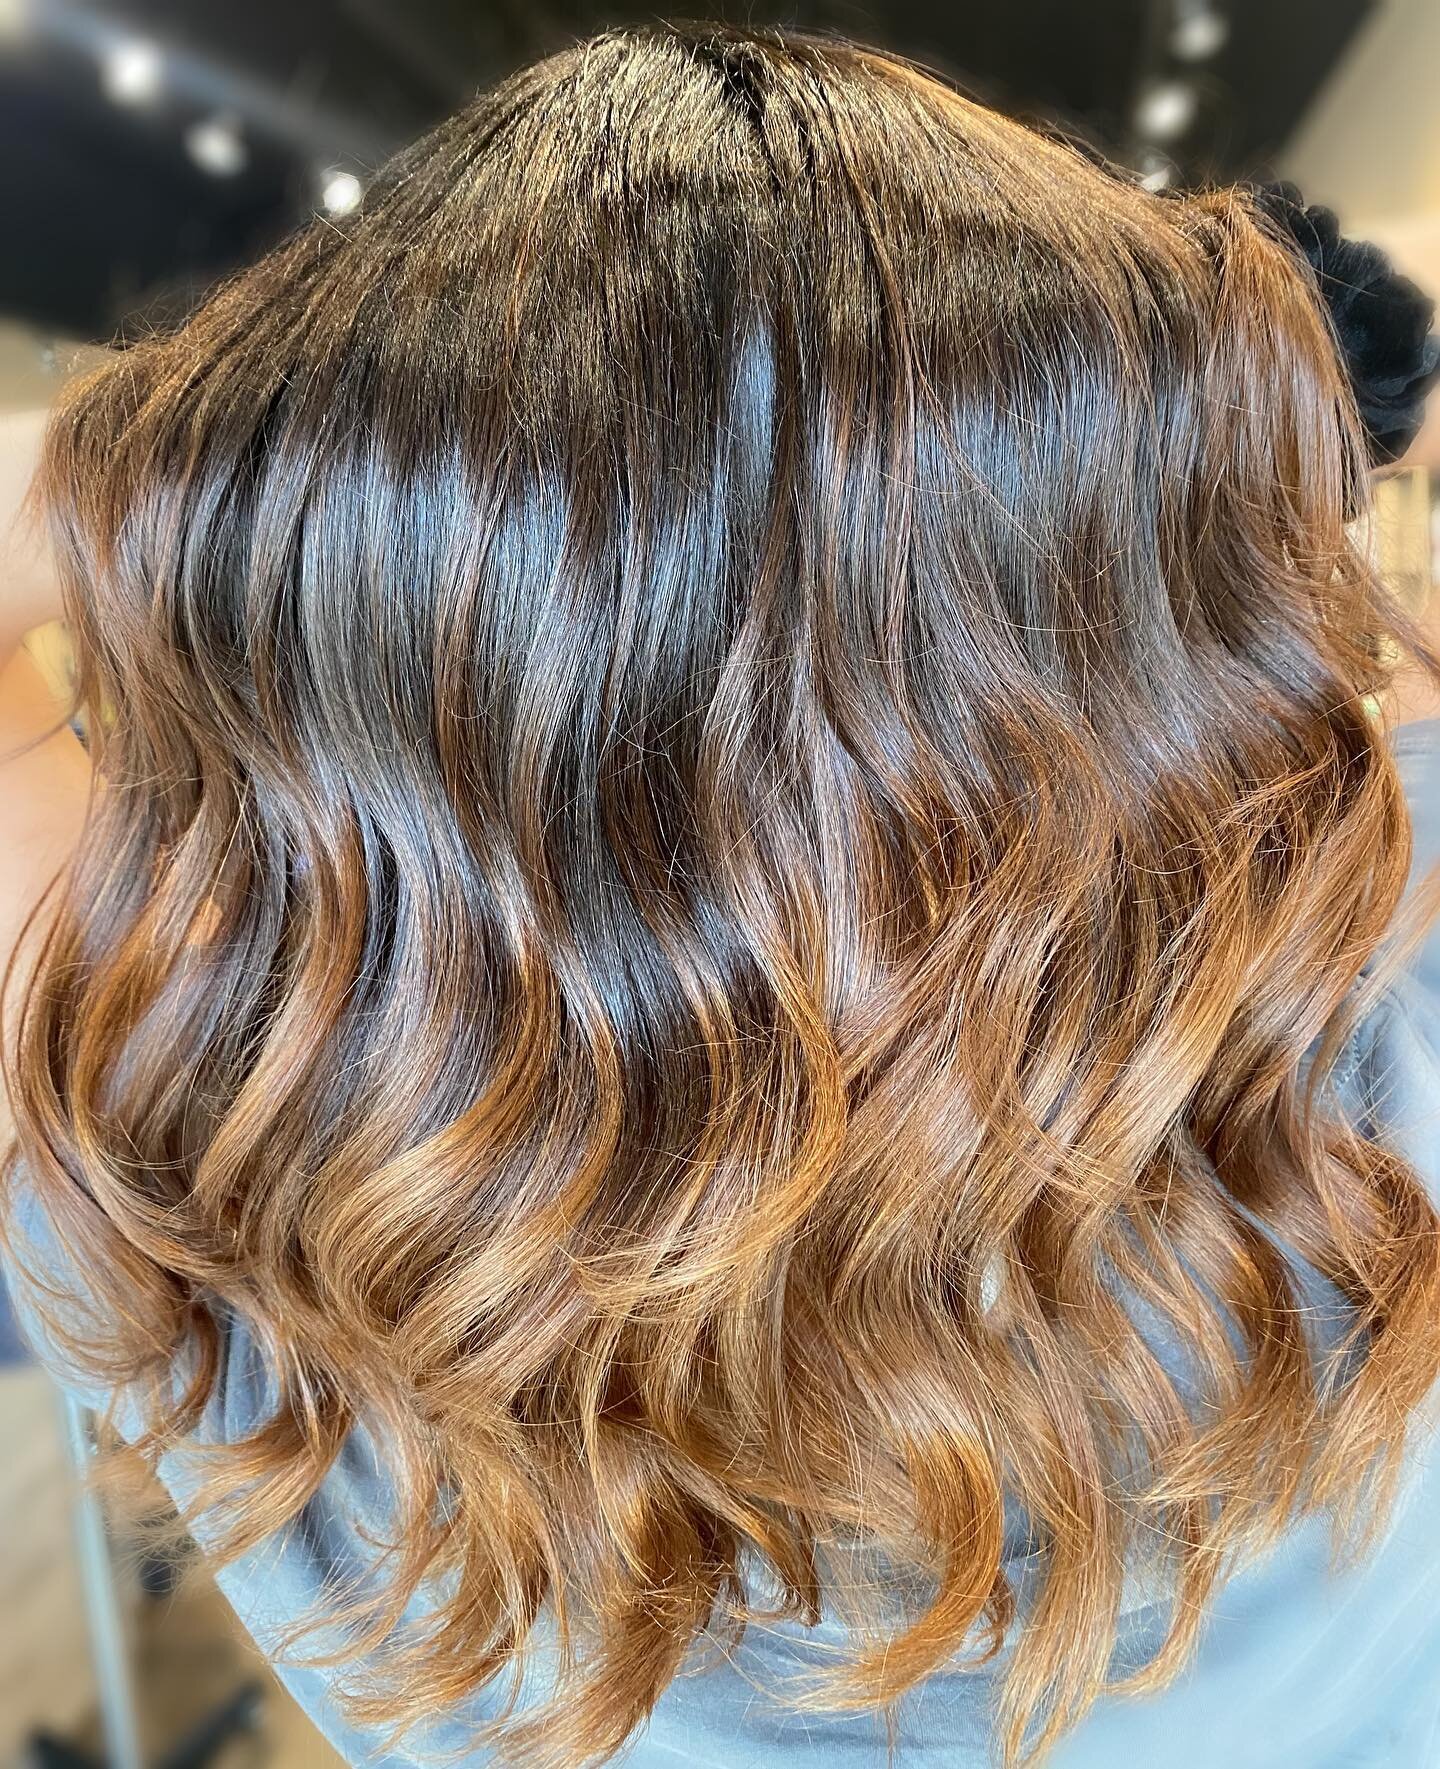 We are loving this hair transformation by Mckailey 🤩 Swipe 👉 to see before